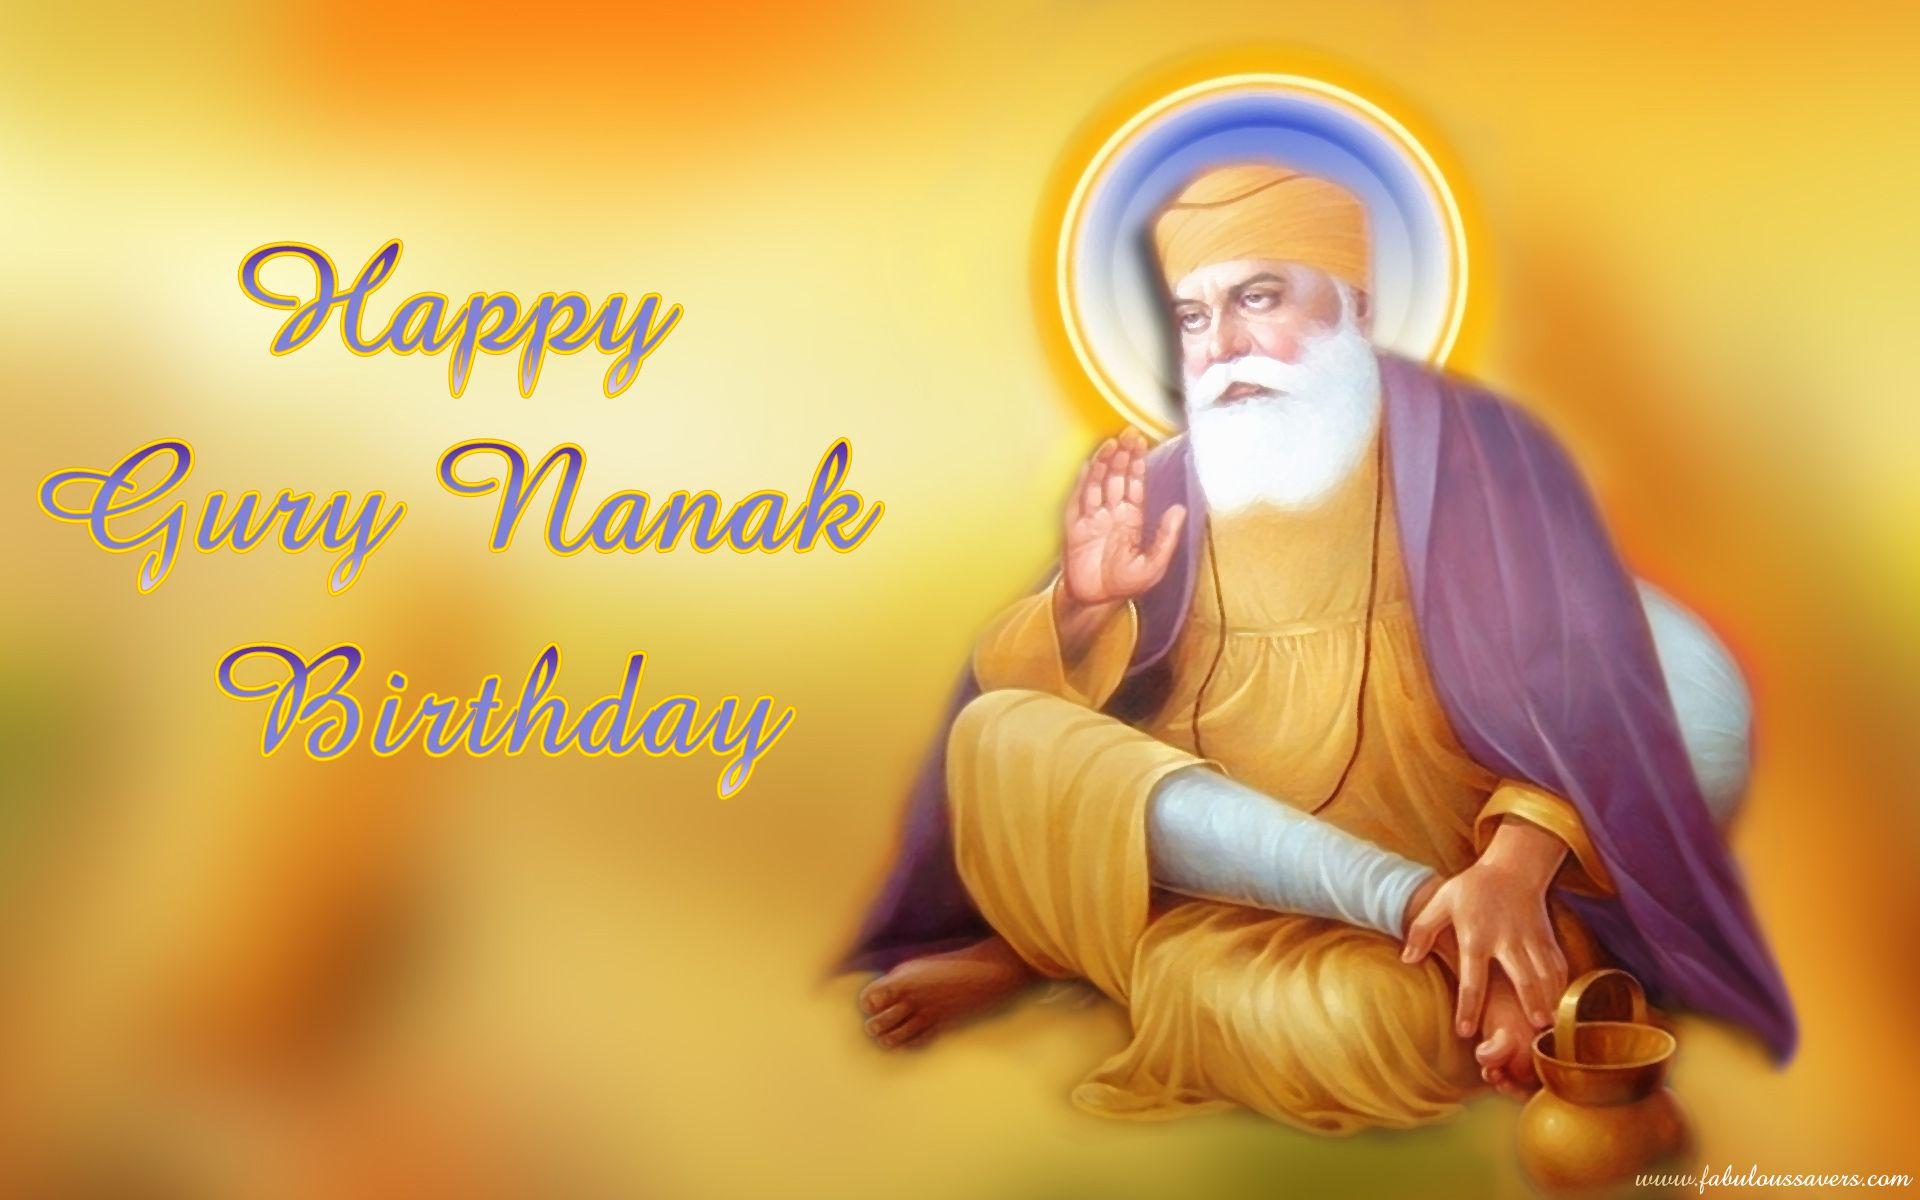 May you find #happiness and peace with the blessings of Guru Nanak